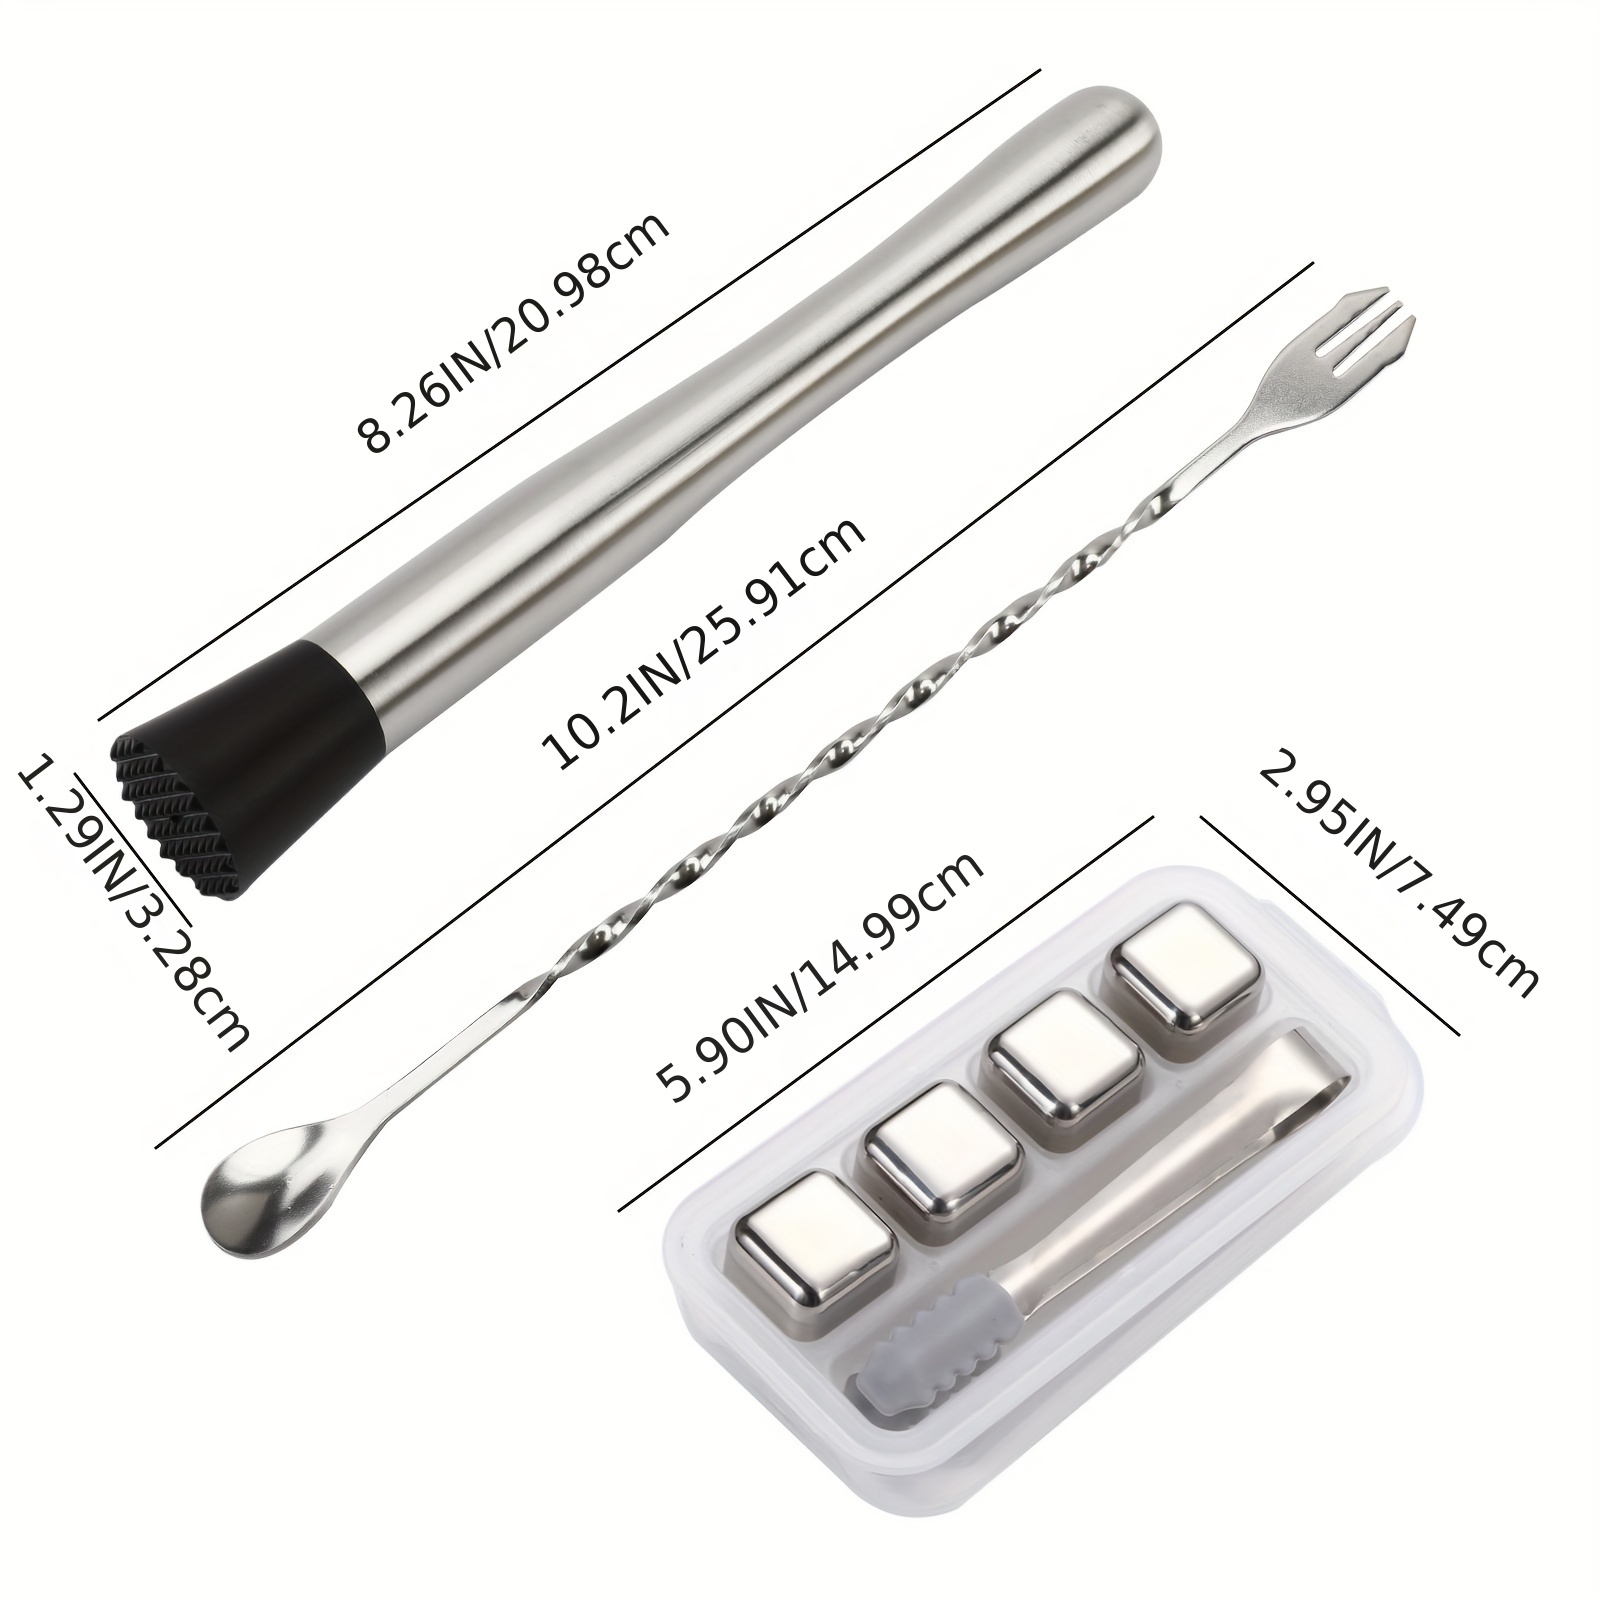 Stainless steel cocktail stirrer